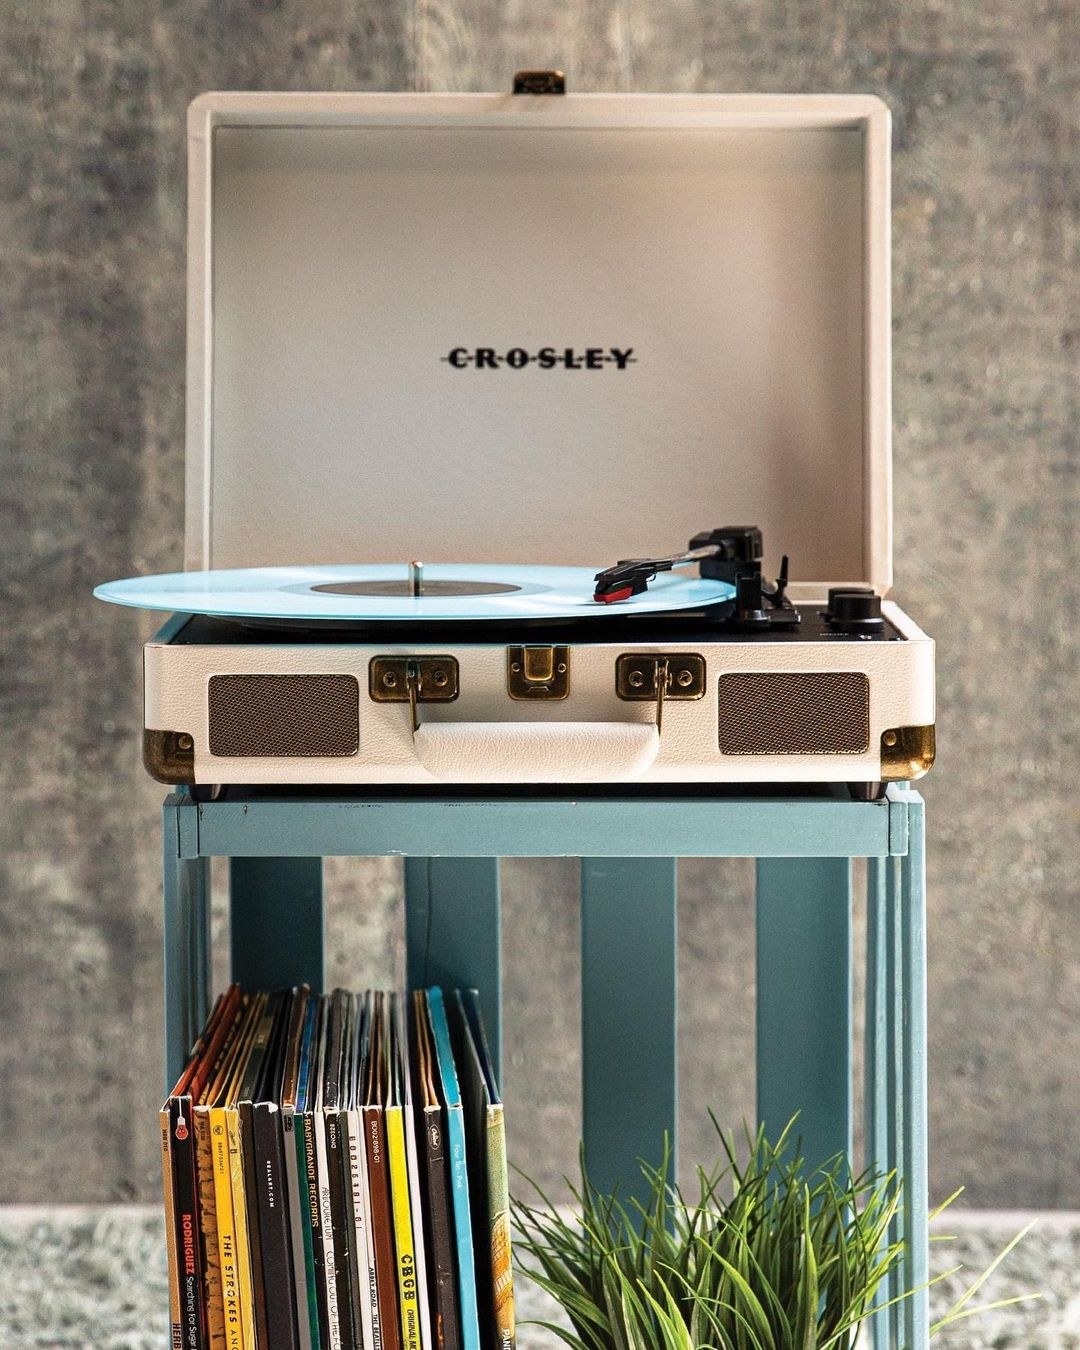 A record player on a small shelf with vinyls stacked below